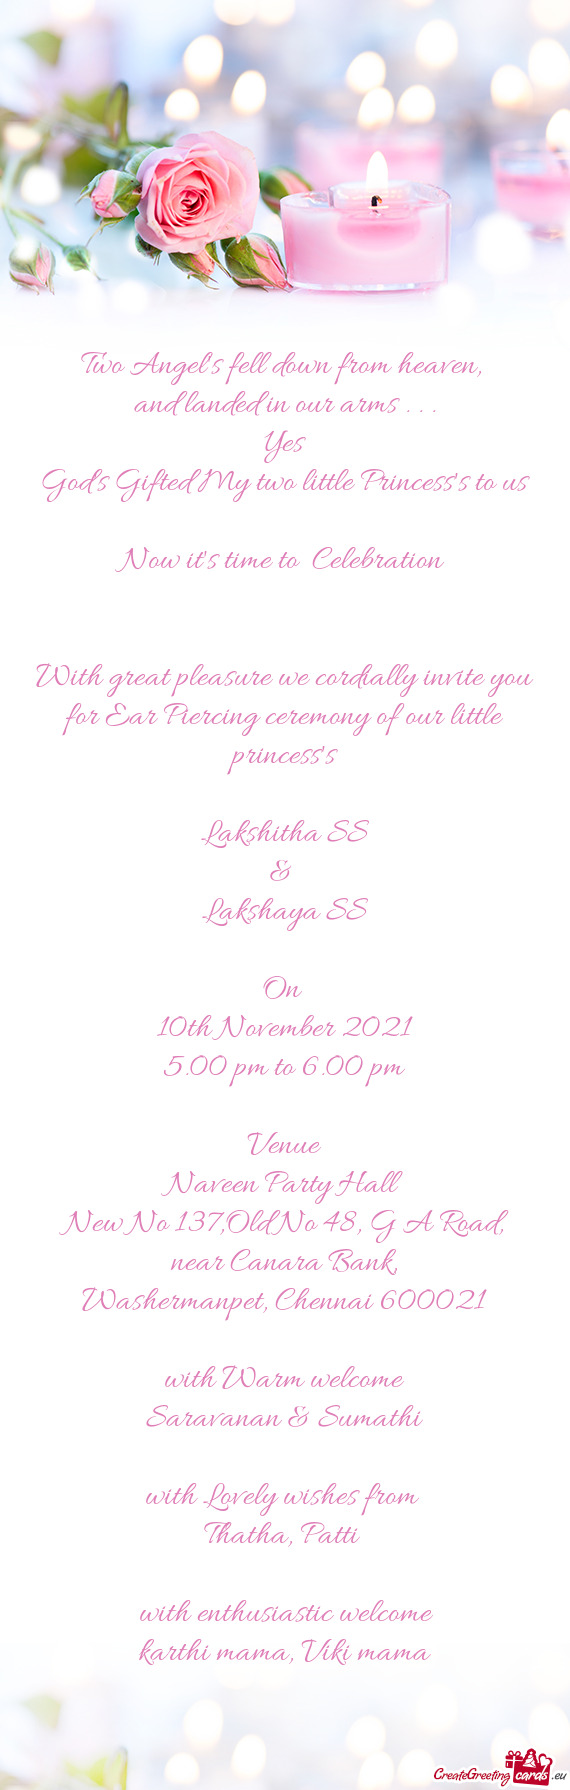 With great pleasure we cordially invite you for Ear Piercing ceremony of our little princess